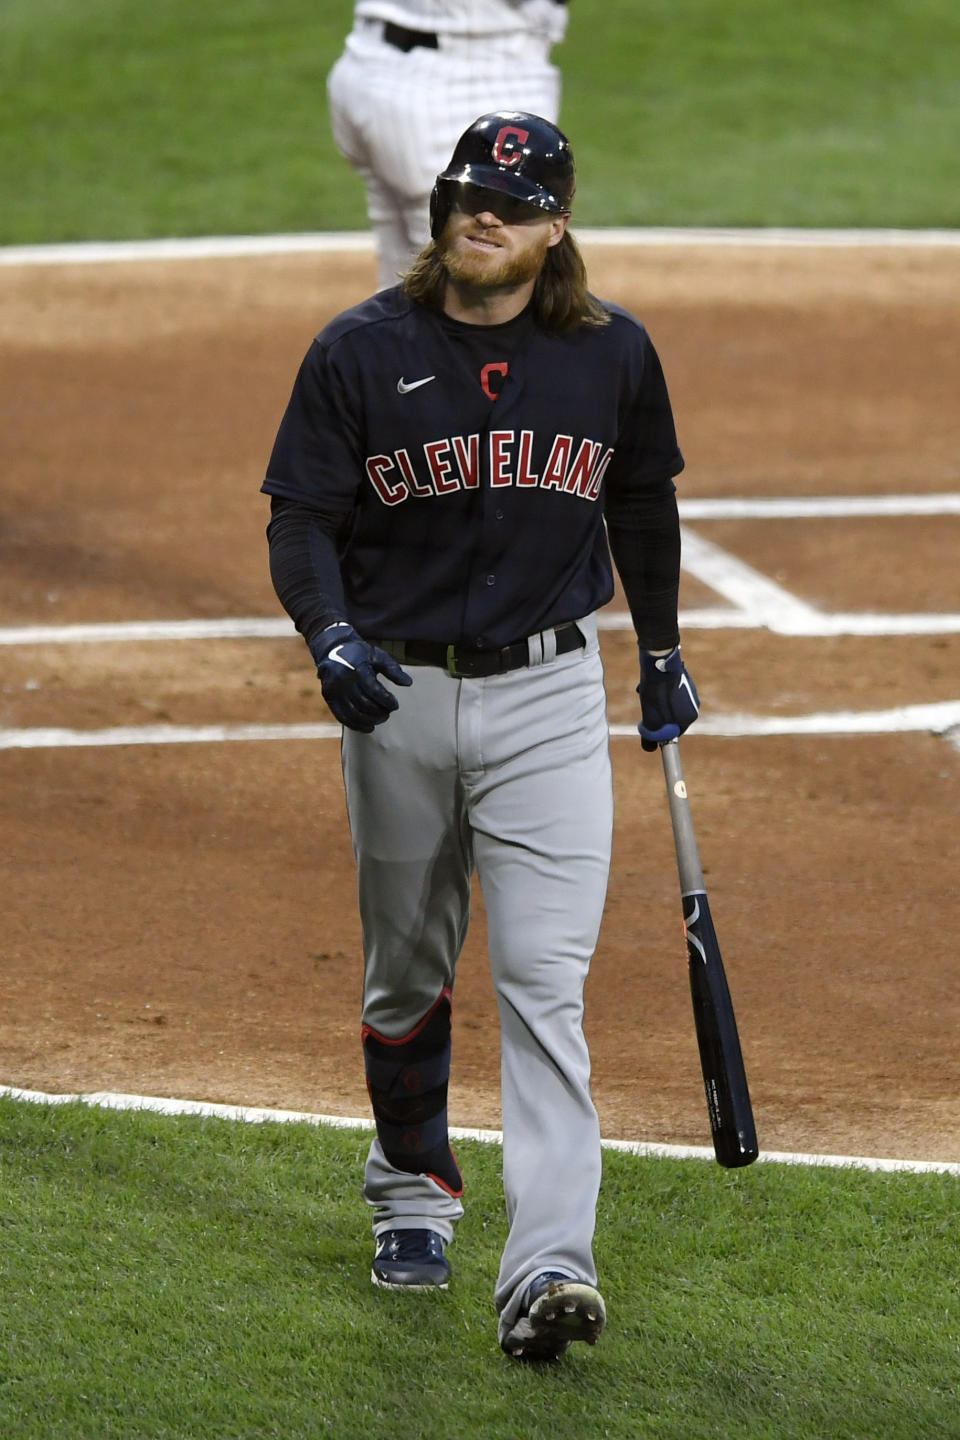 Cleveland Indians' Ben Gamel reacts after striking out during the first inning of a baseball game against the Chicago White Sox Tuesday, April 13, 2021, in Chicago. (AP Photo/Paul Beaty)